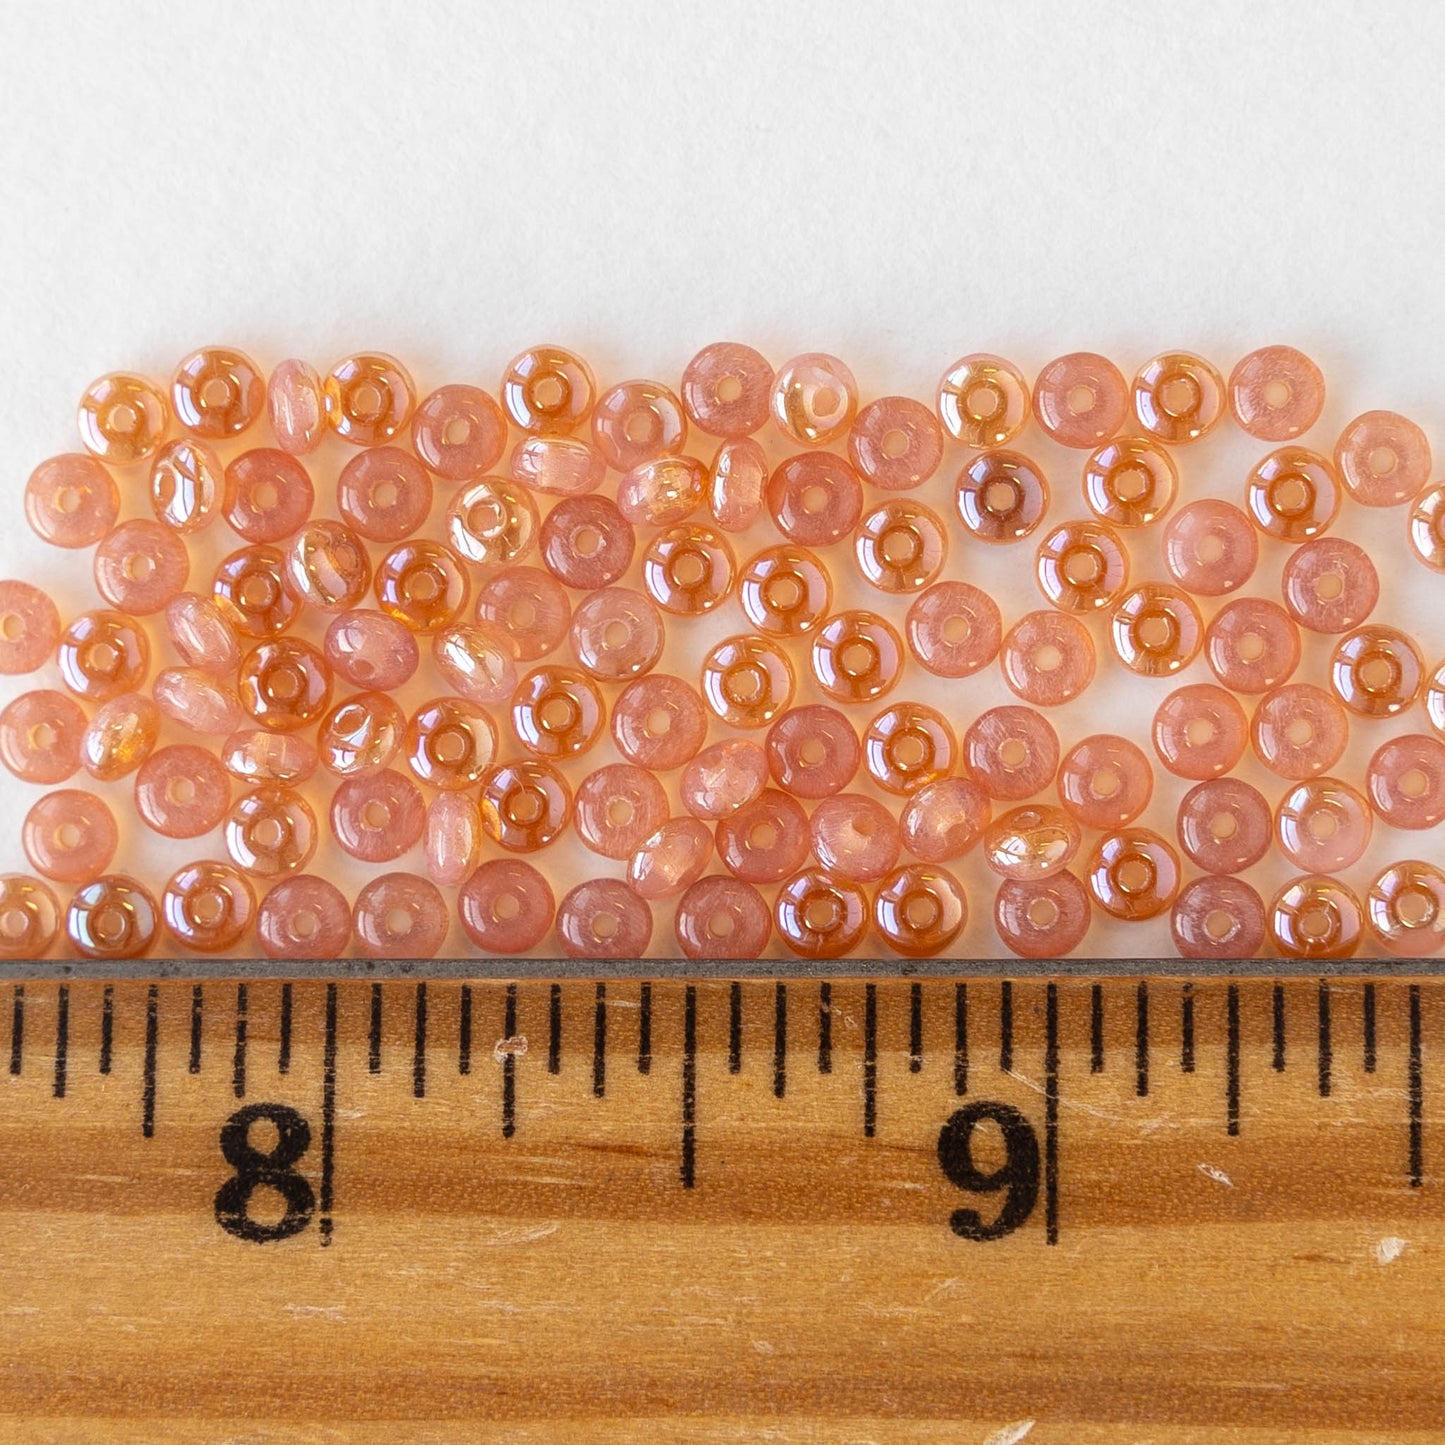 3mm Rondelle Beads - Milky Peach Pink Celsian - 100 Beads